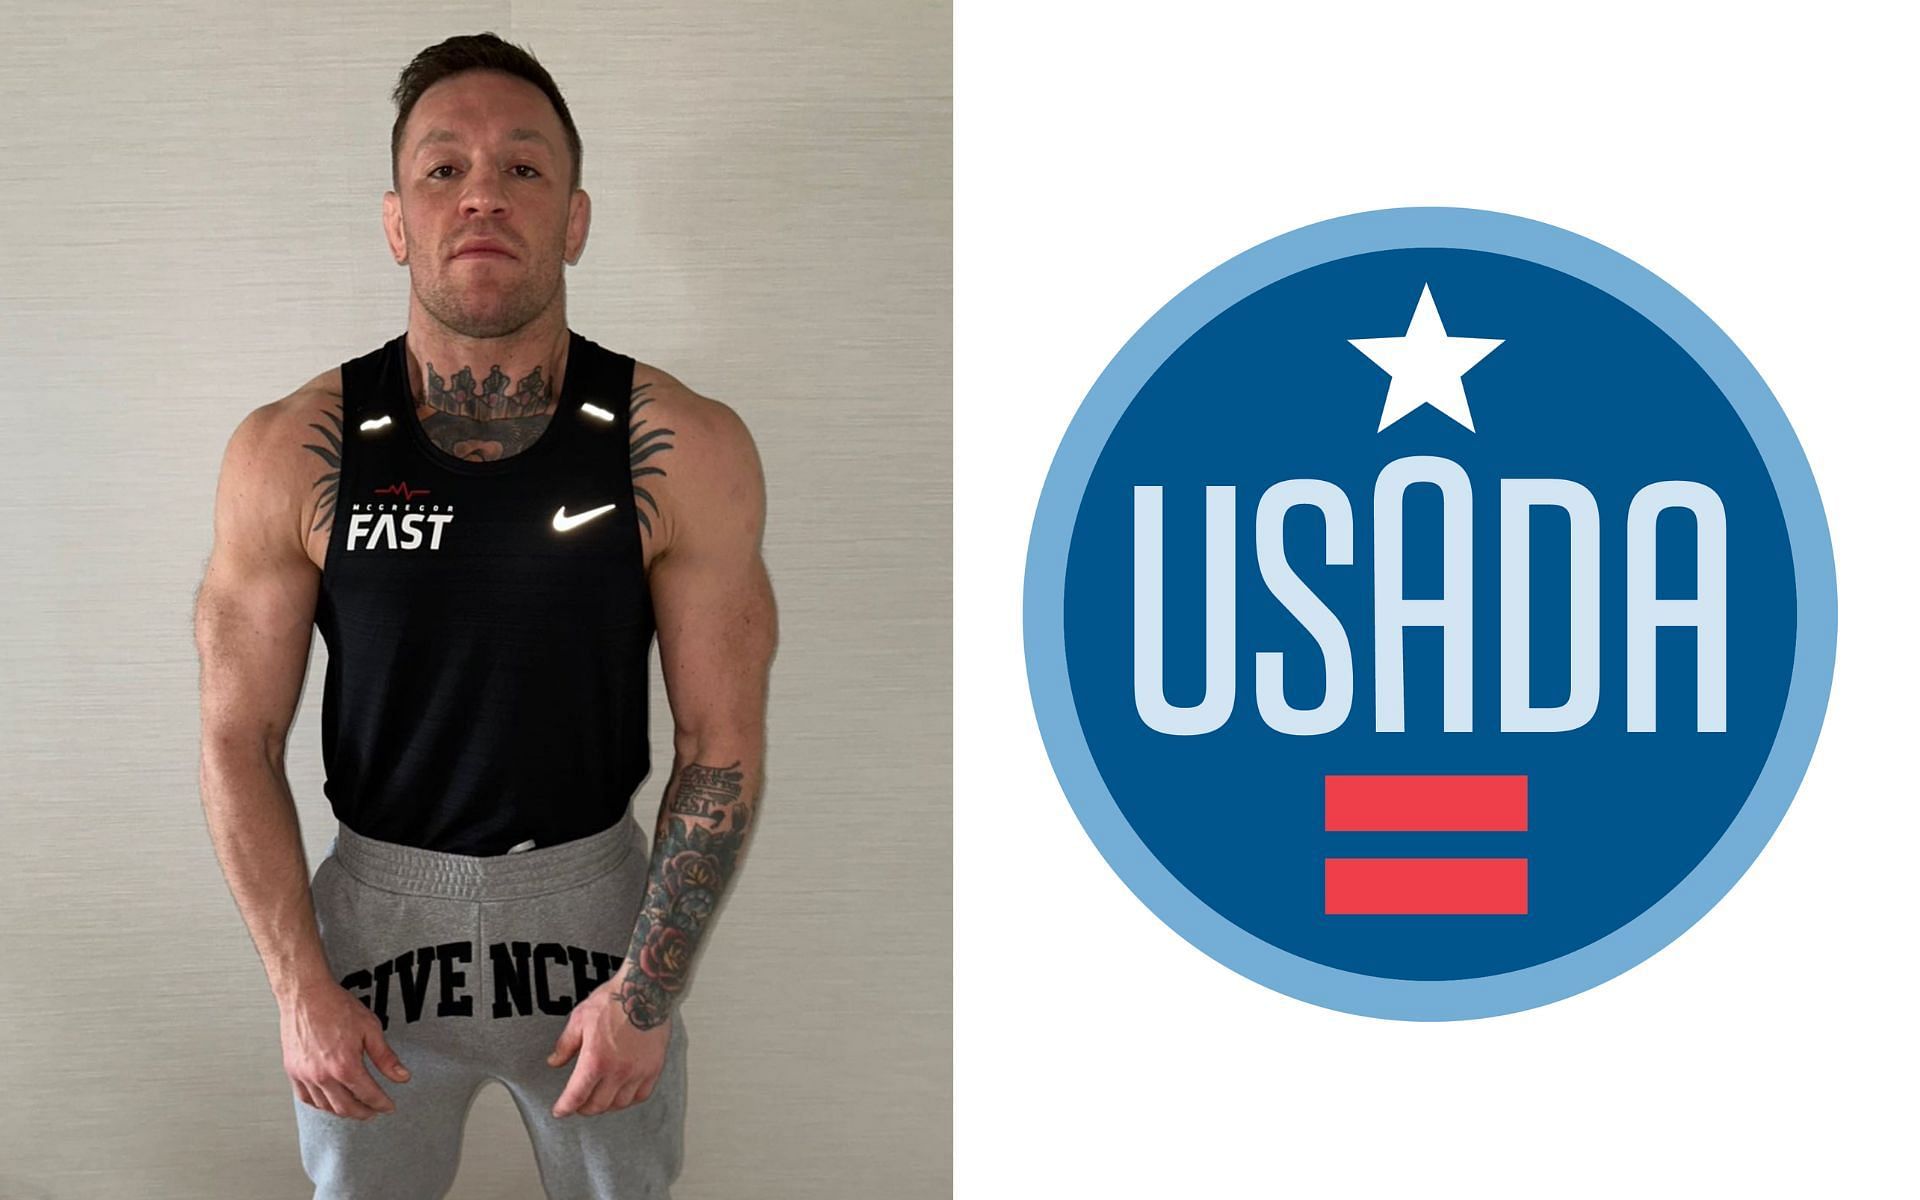 Conor McGregor [Left] USADA logo [Right] [Images courtesy: @TheNotoriousMMA (Twitter) and www.usada.org]